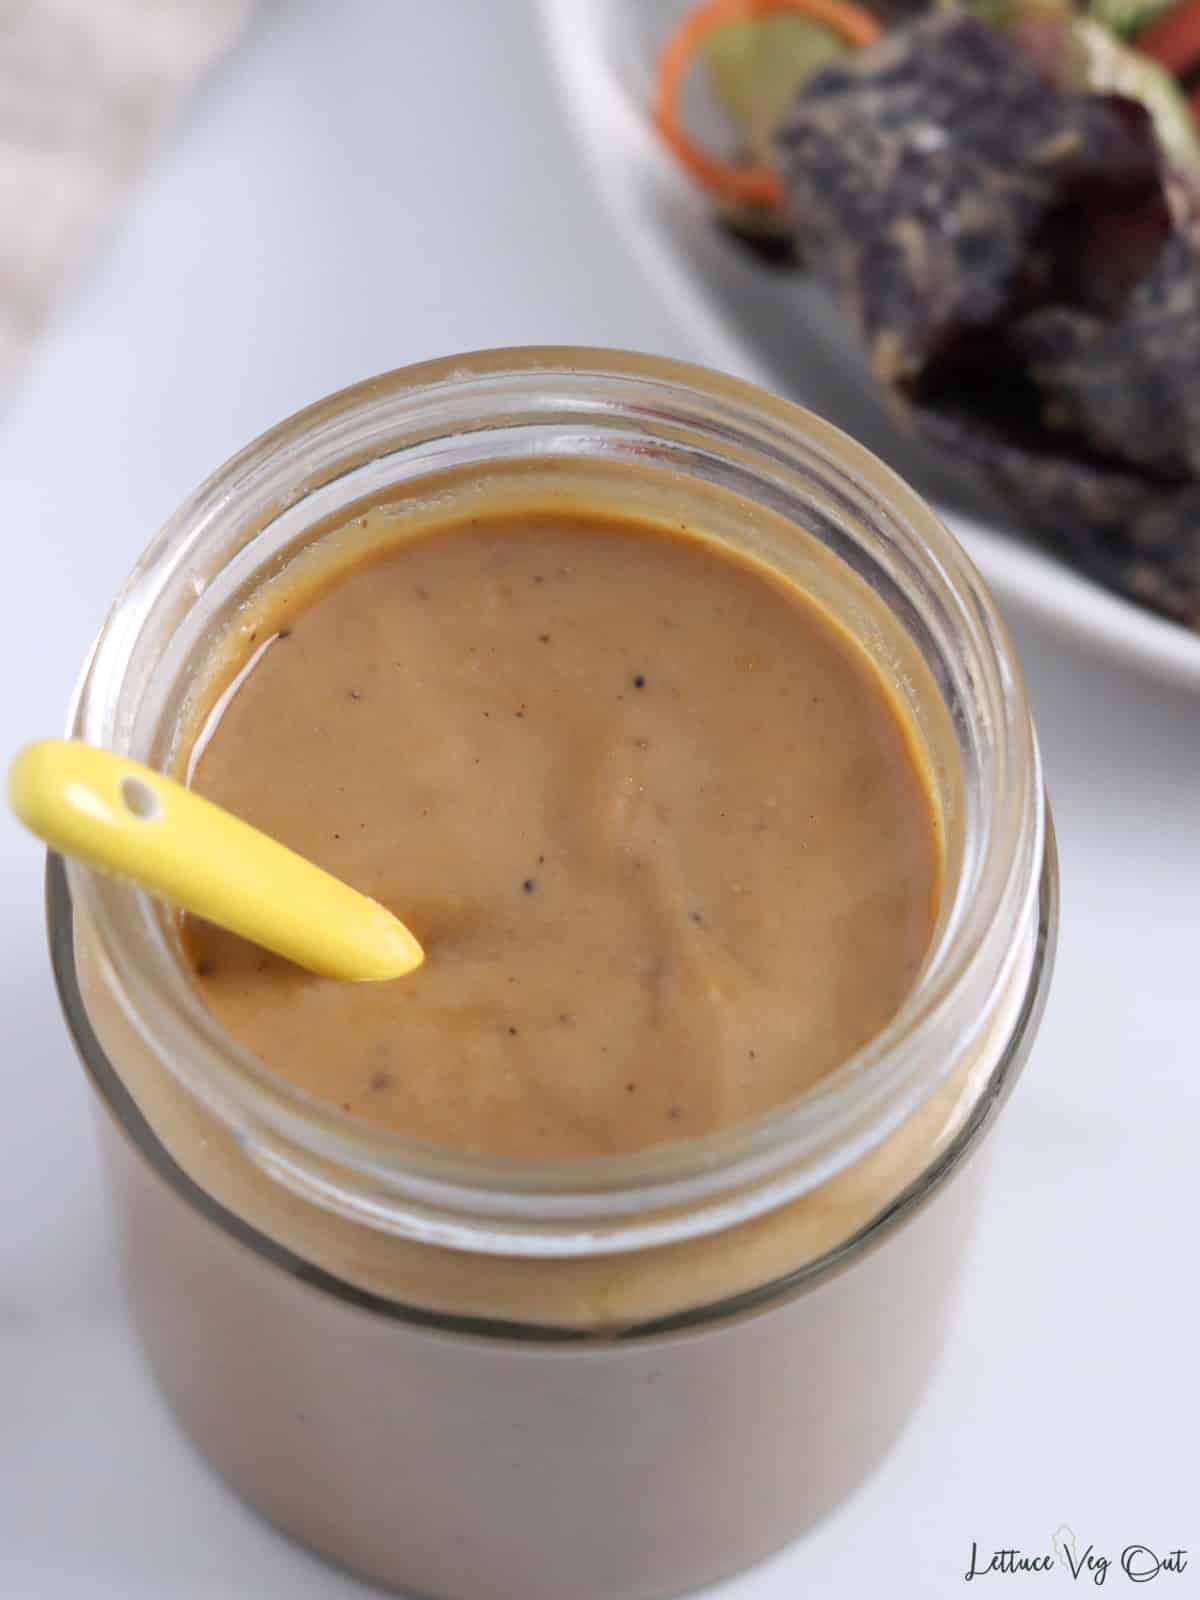 Top view of jar of balsamic tahini dressing with small yellow spoon in it.